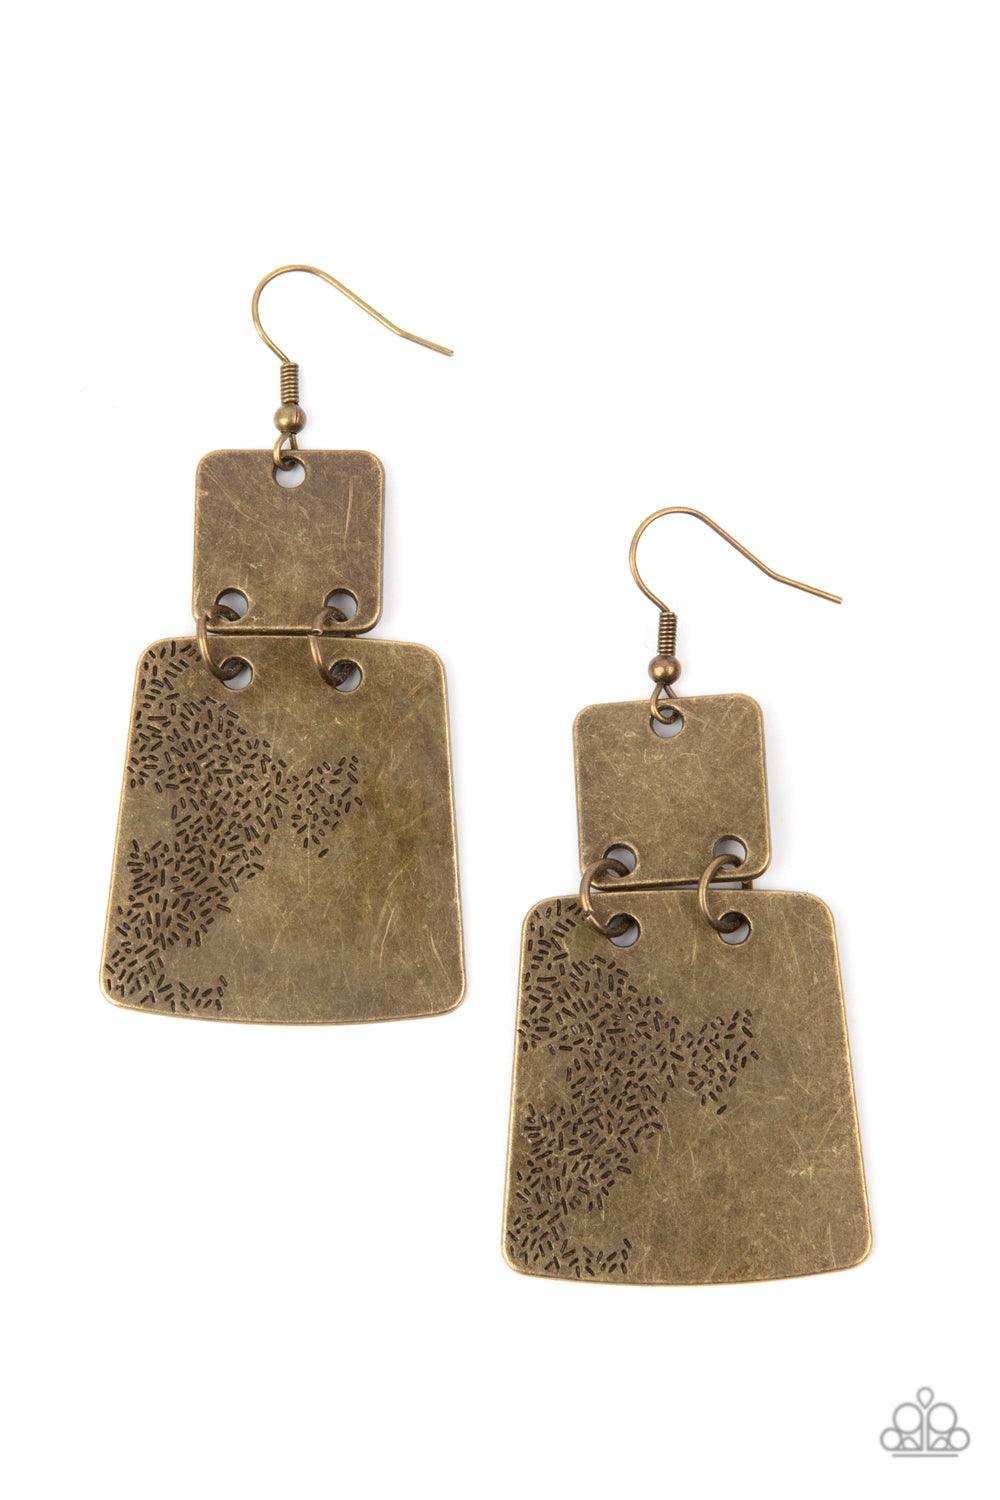 Paparazzi Accessories Tagging Along - Brass Stamped in an abstract pattern, a flared brass plate links to the bottom of a square brass frame, creating a rustic lure. Earring attaches to a standard fishhook fitting. Sold as one pair of earrings. Earrings